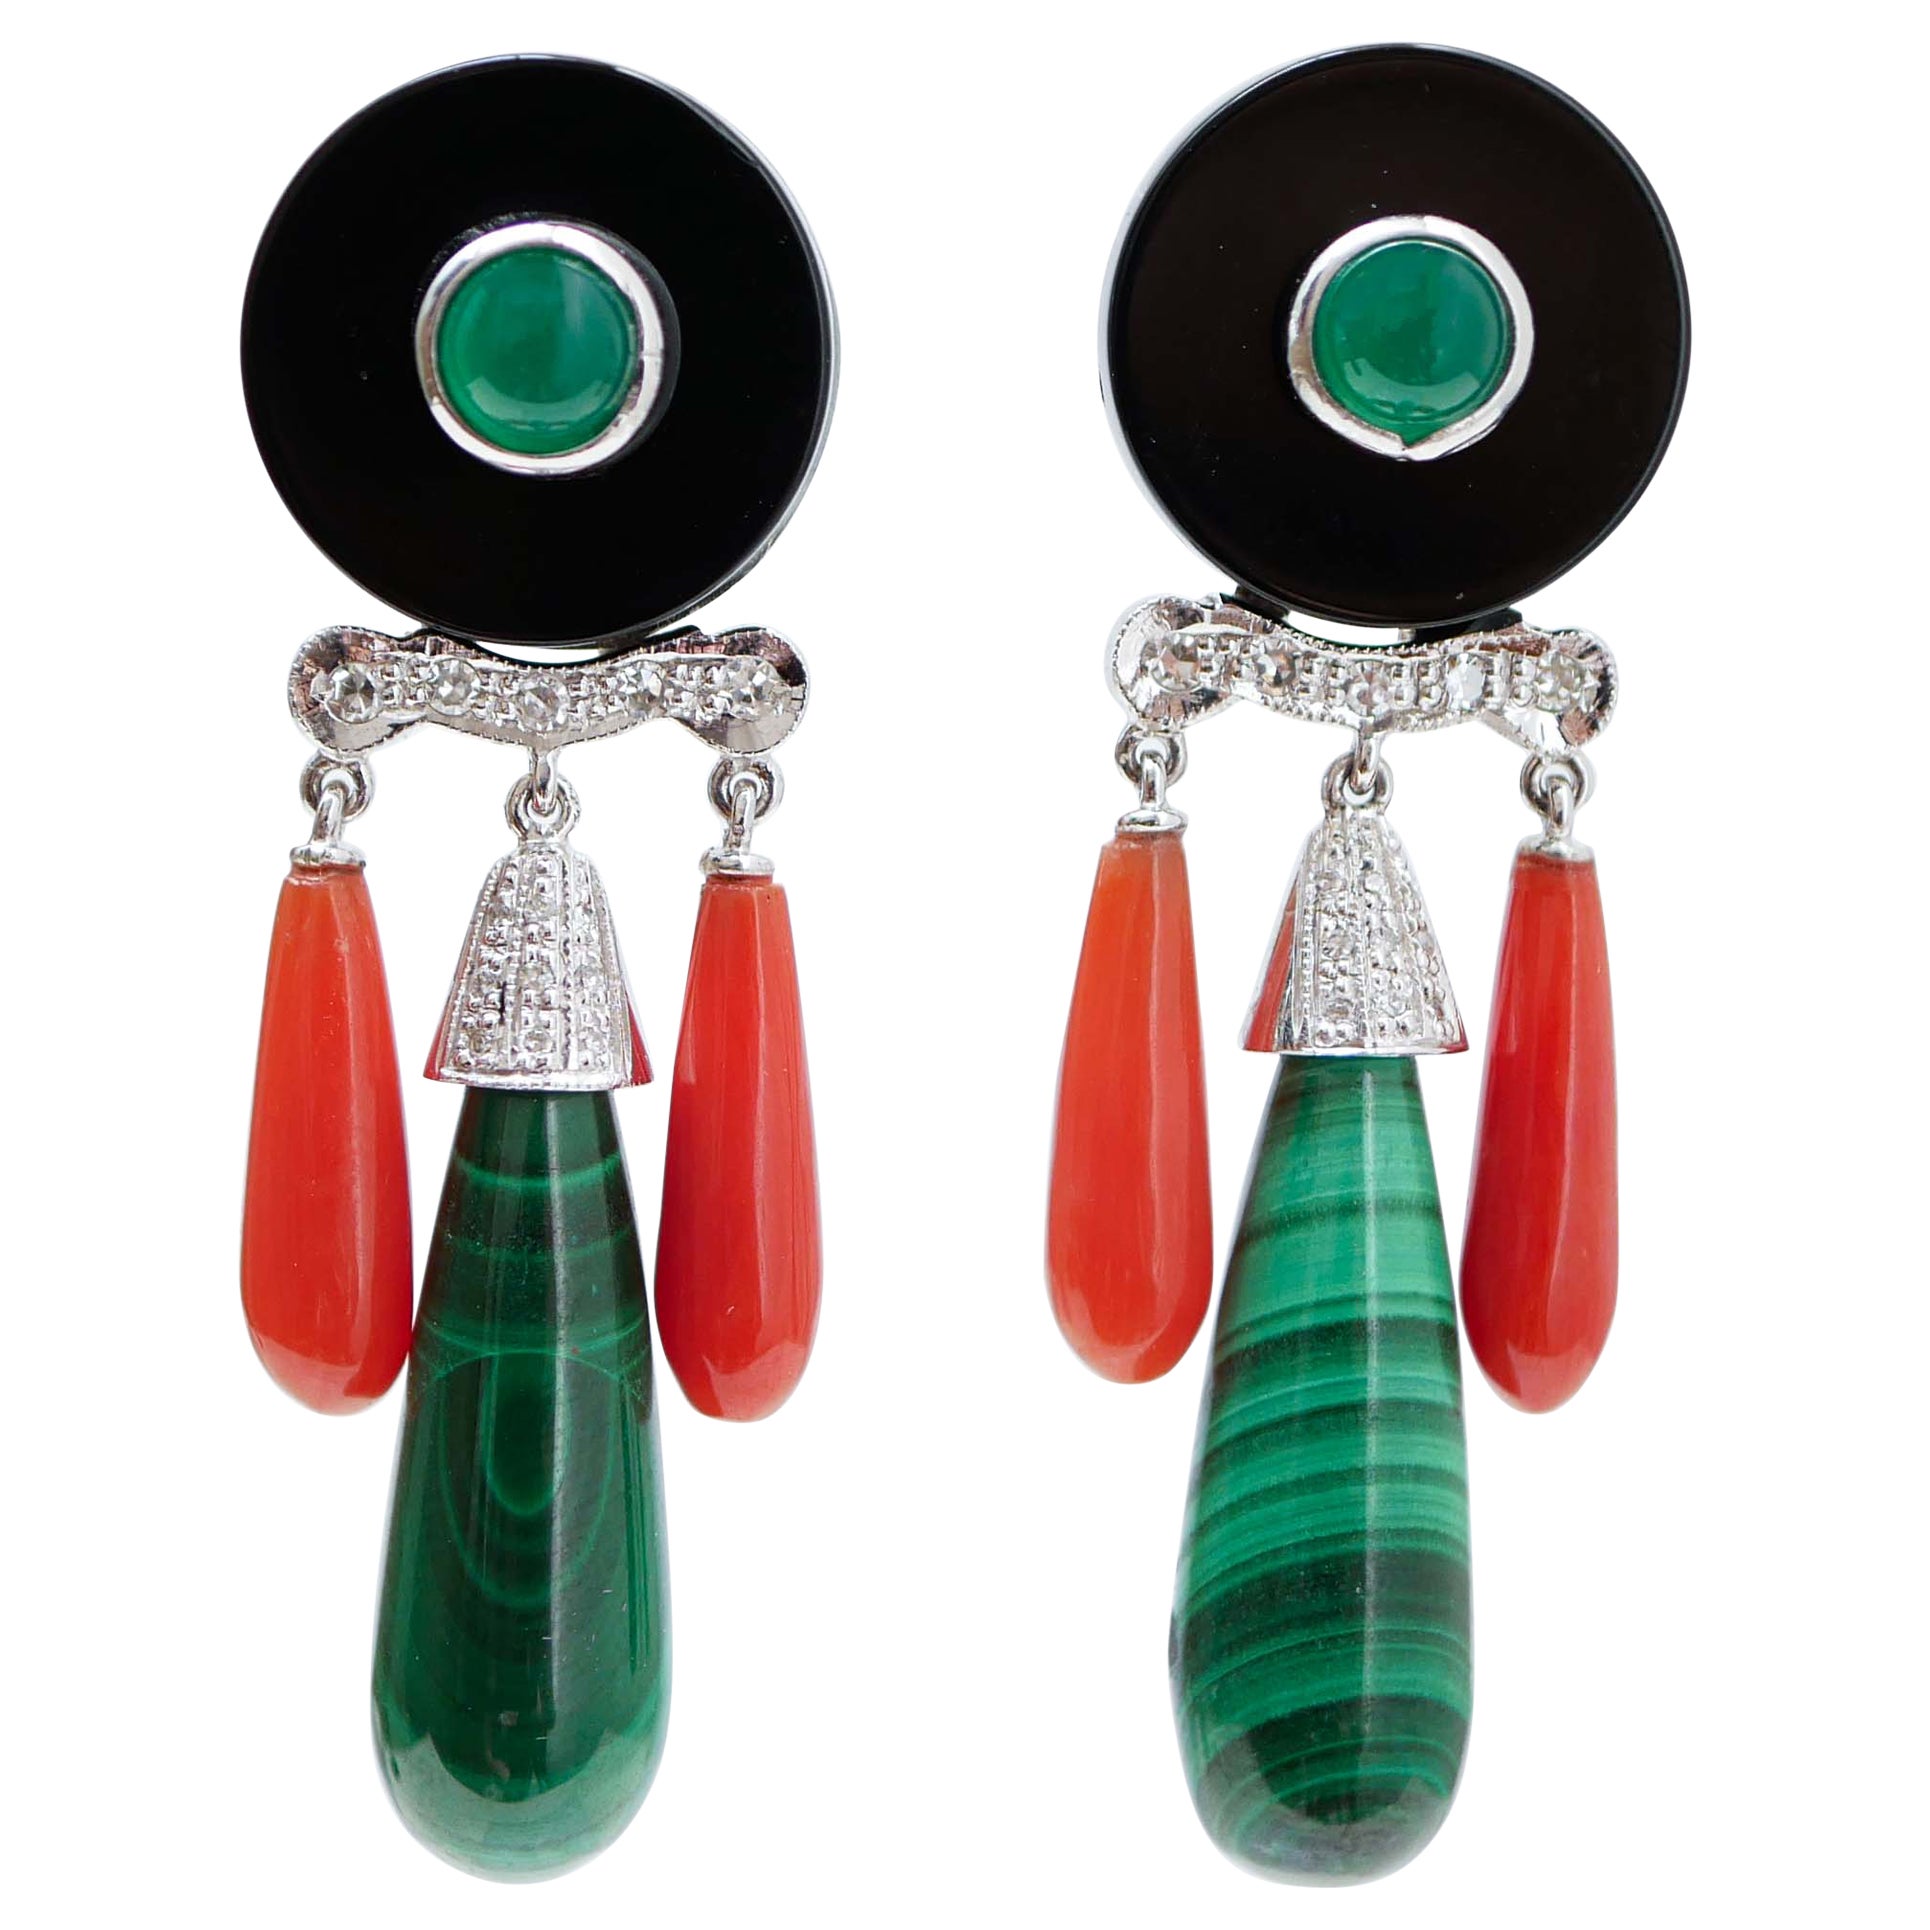 Green Agate, Malakite, Onyx, Coral, Diamonds, Platinum and Gold Dangle Earrings.